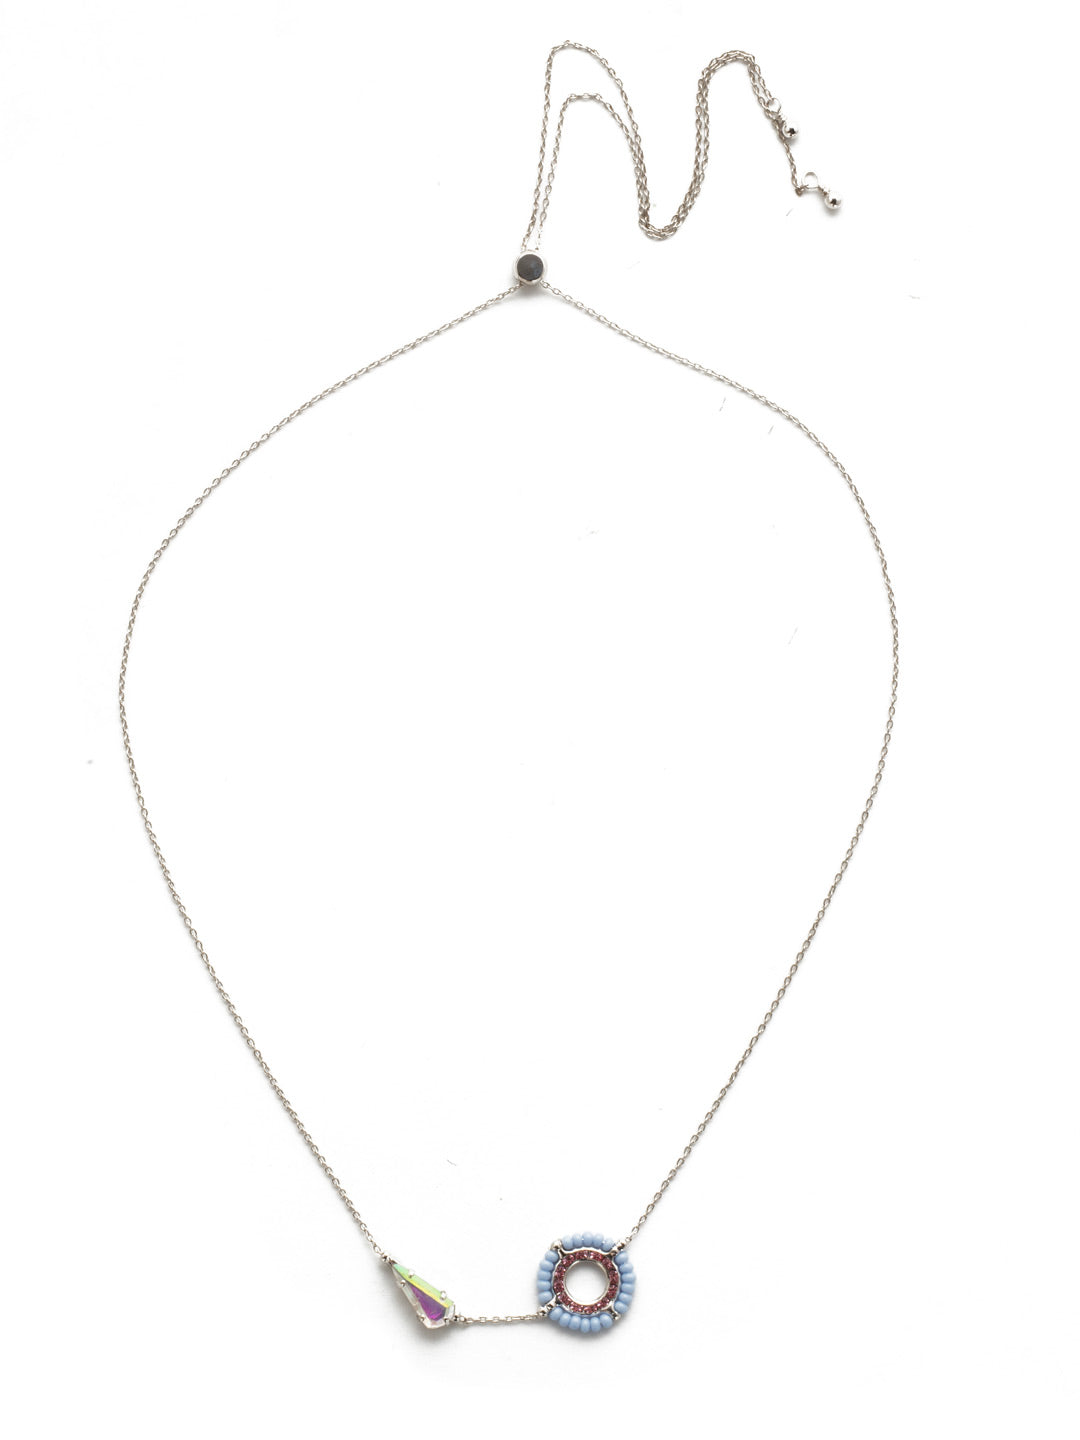 Lyra Pendant Necklace - NEK20RHSSU - <p>A delicate airy, architectural gem. Slip on this pendant necklace featuring a navette crystal and delicate beadwork when you're looking for something extra special. From Sorrelli's Seersucker collection in our Palladium Silver-tone finish.</p>